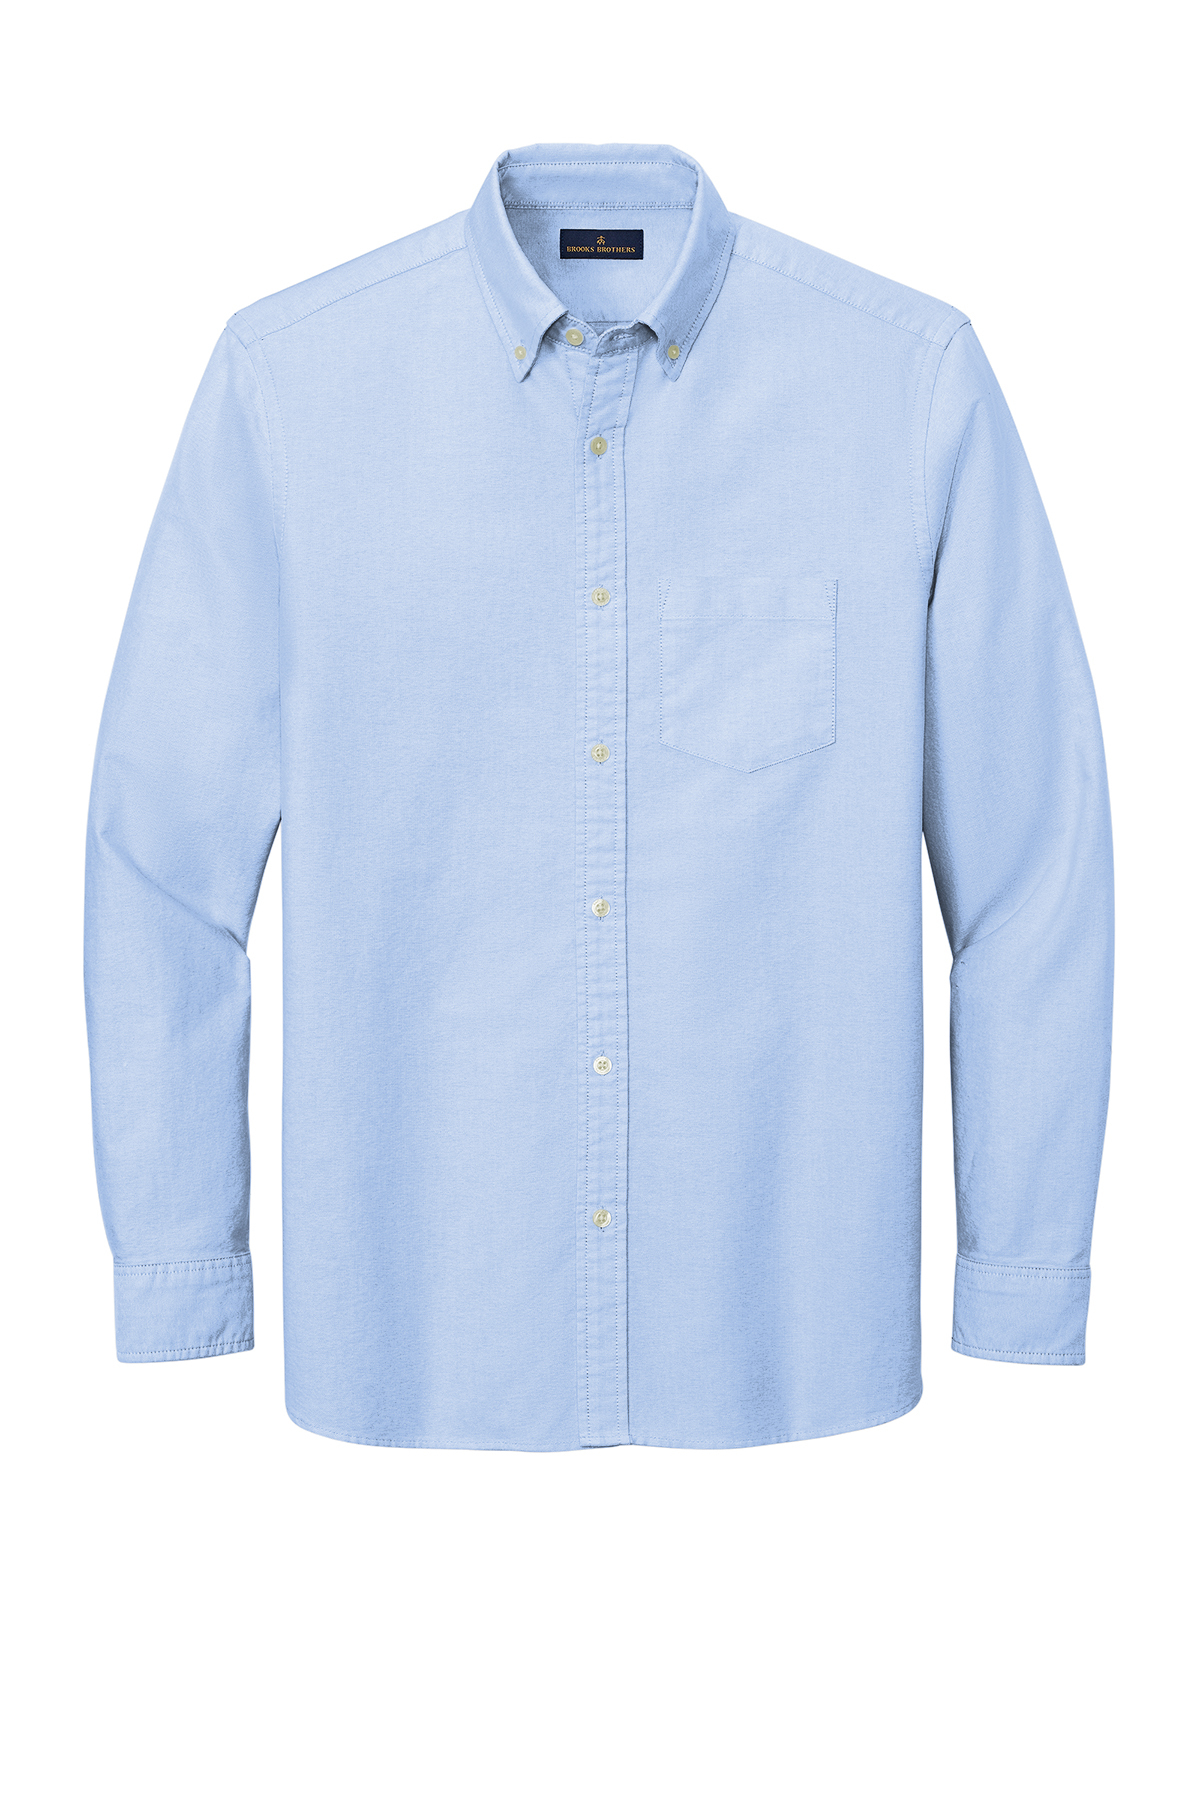 Brooks Brothers Casual Oxford Cloth Shirt | Product | SanMar